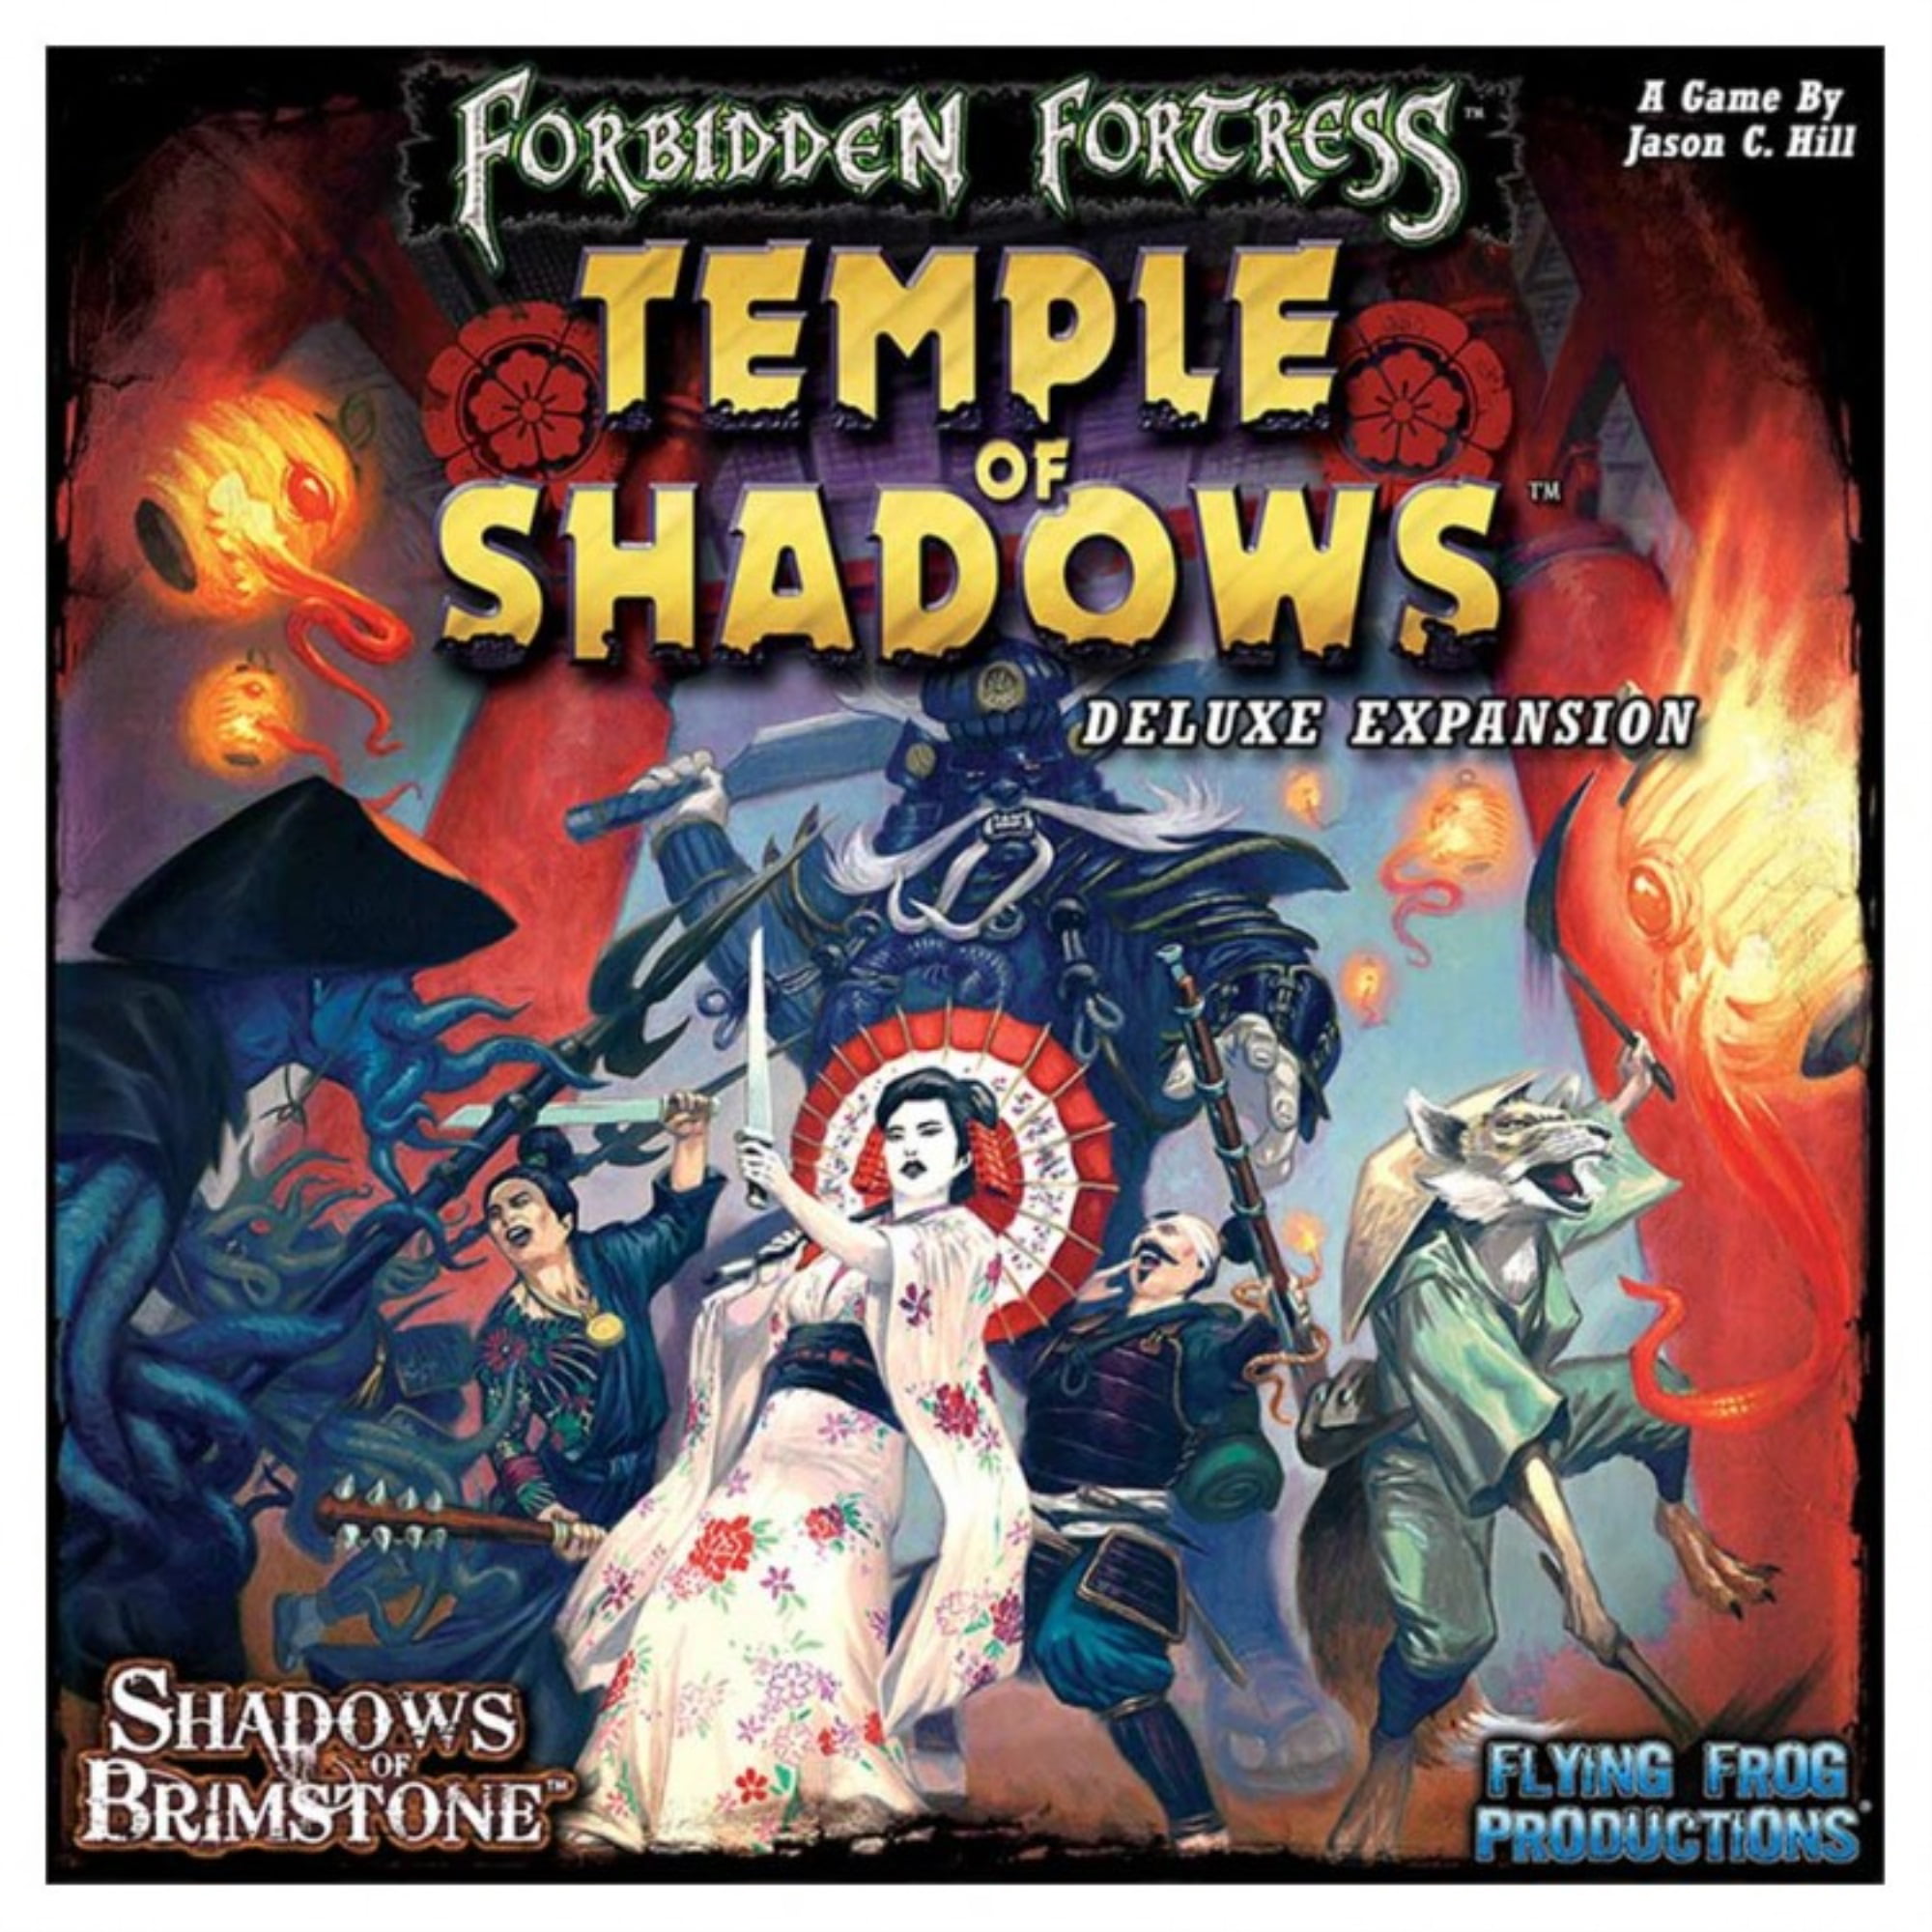 Fyf0712 Shadows Of Brimstone Temple Of Shadows Deluxe Expansion Board Game